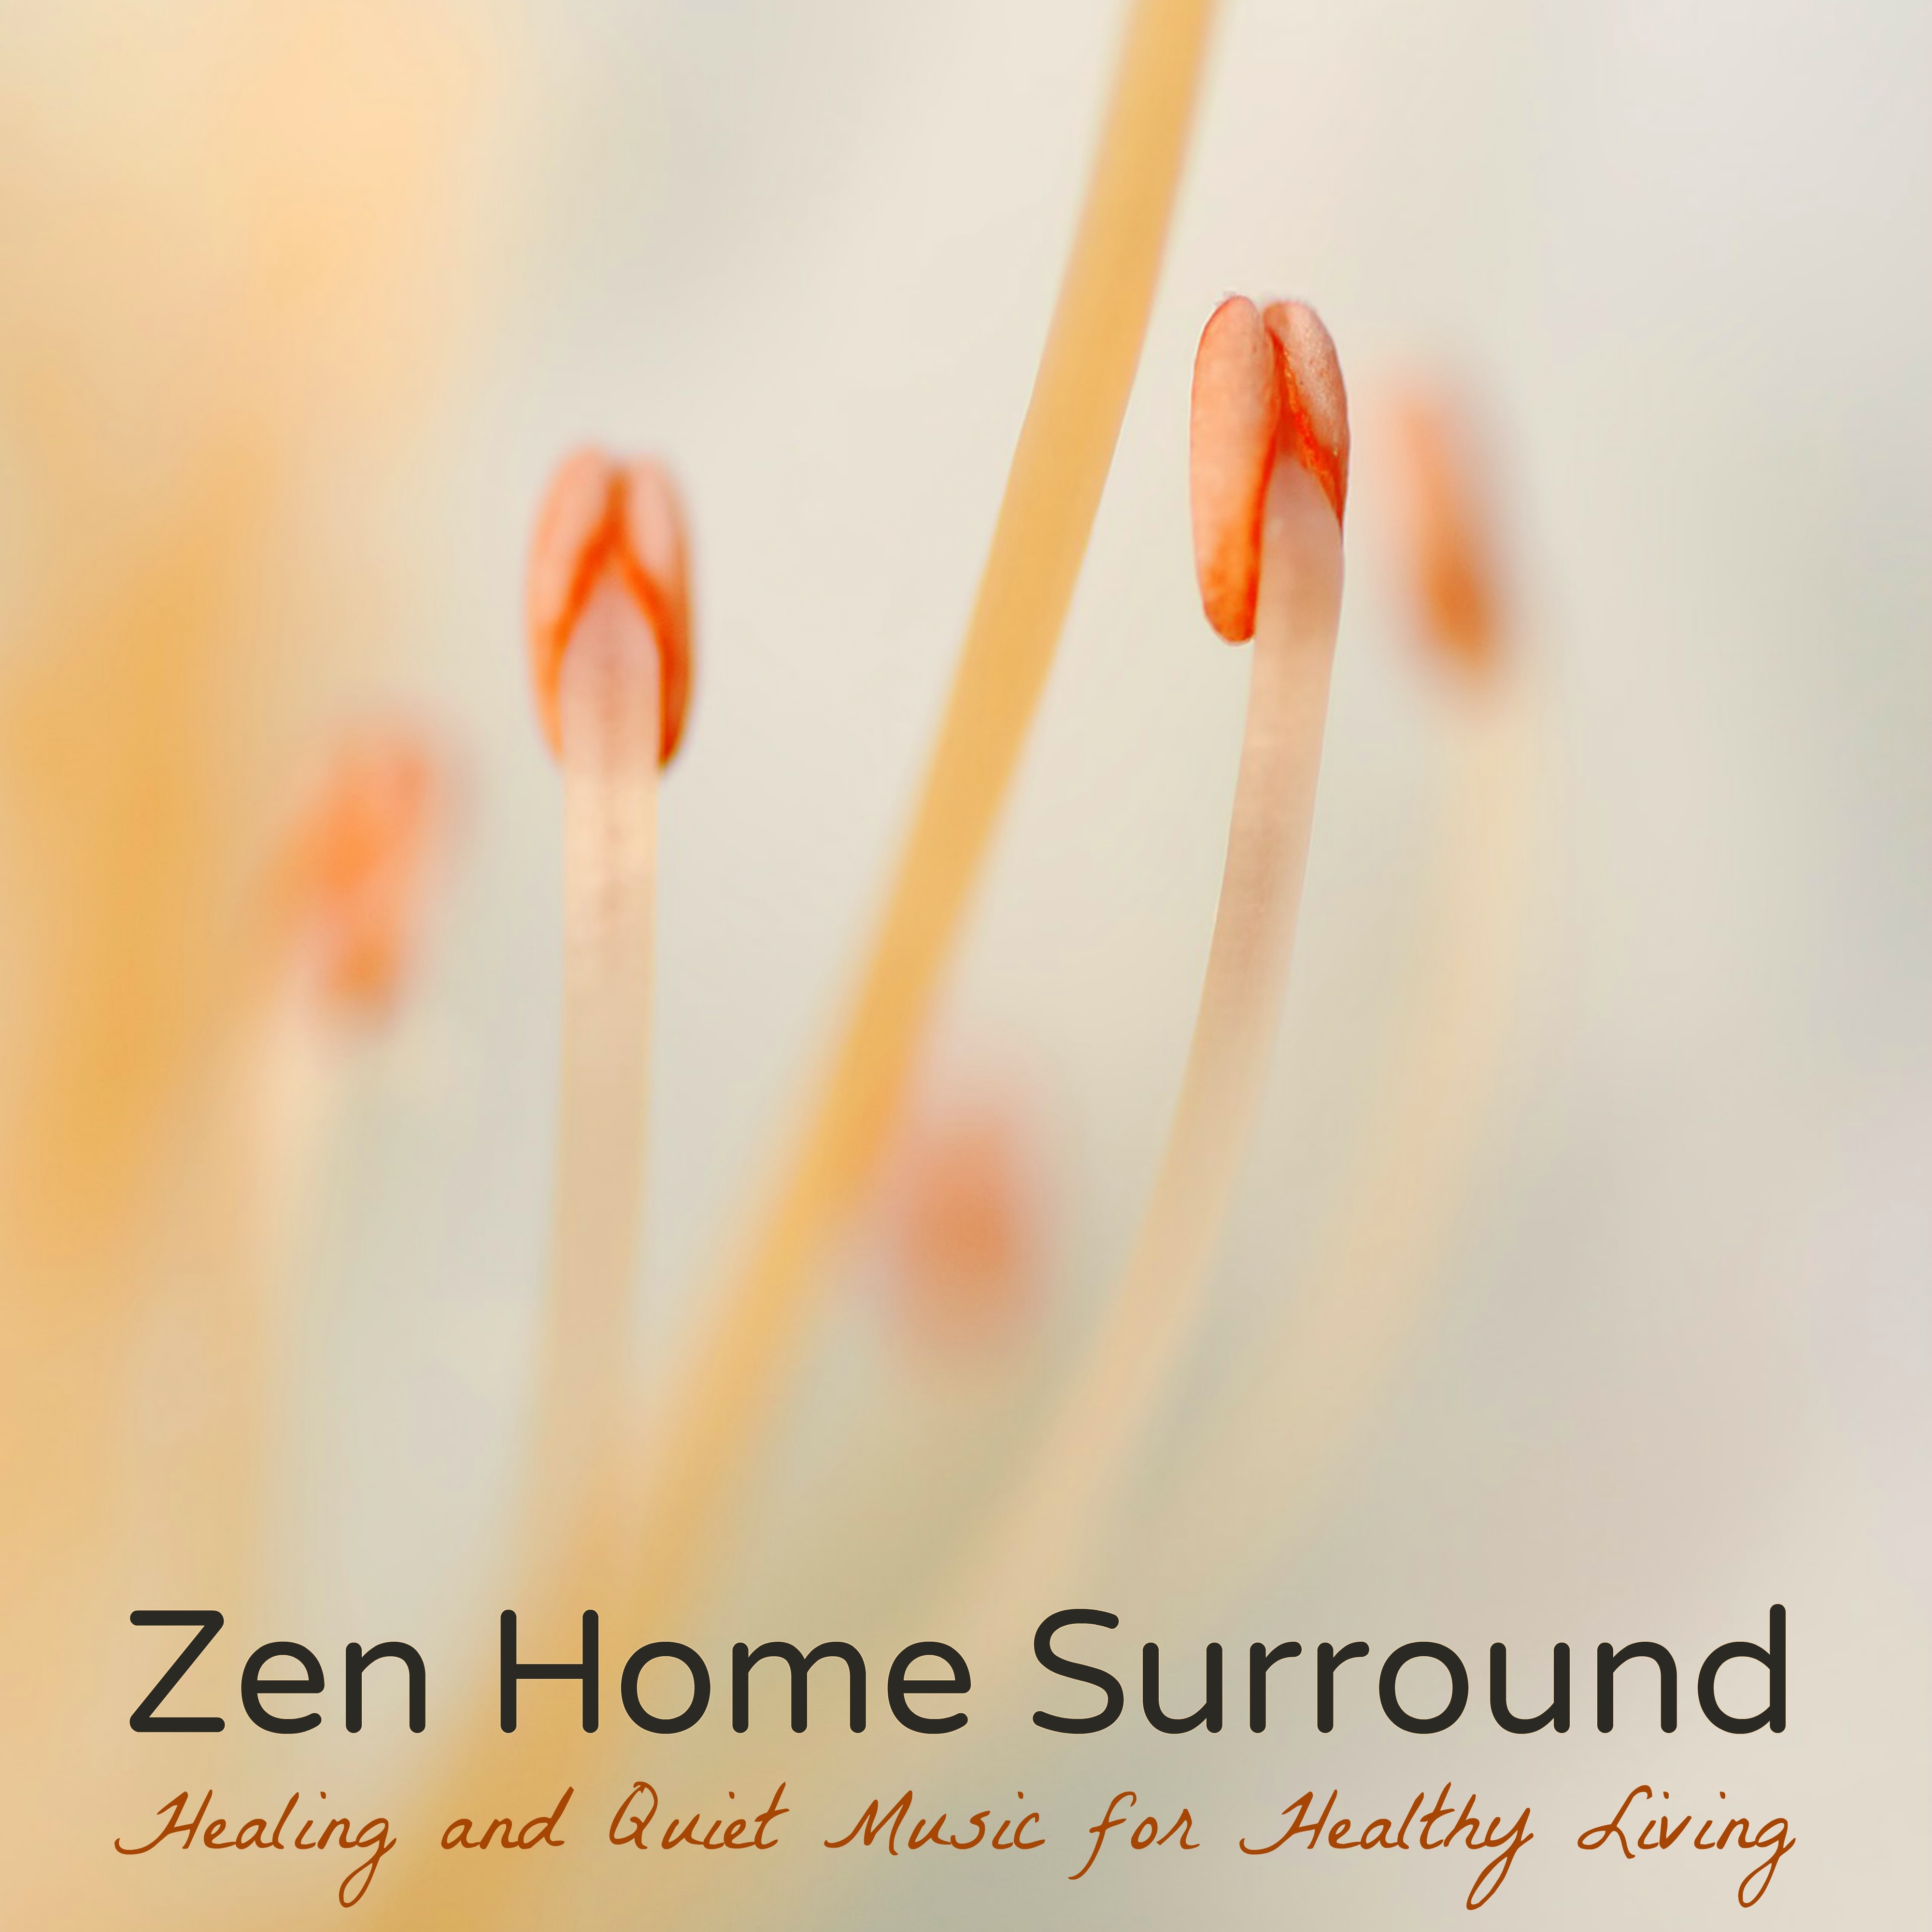 Zen Home Surround  Healing and Quiet Music for Healthy Living